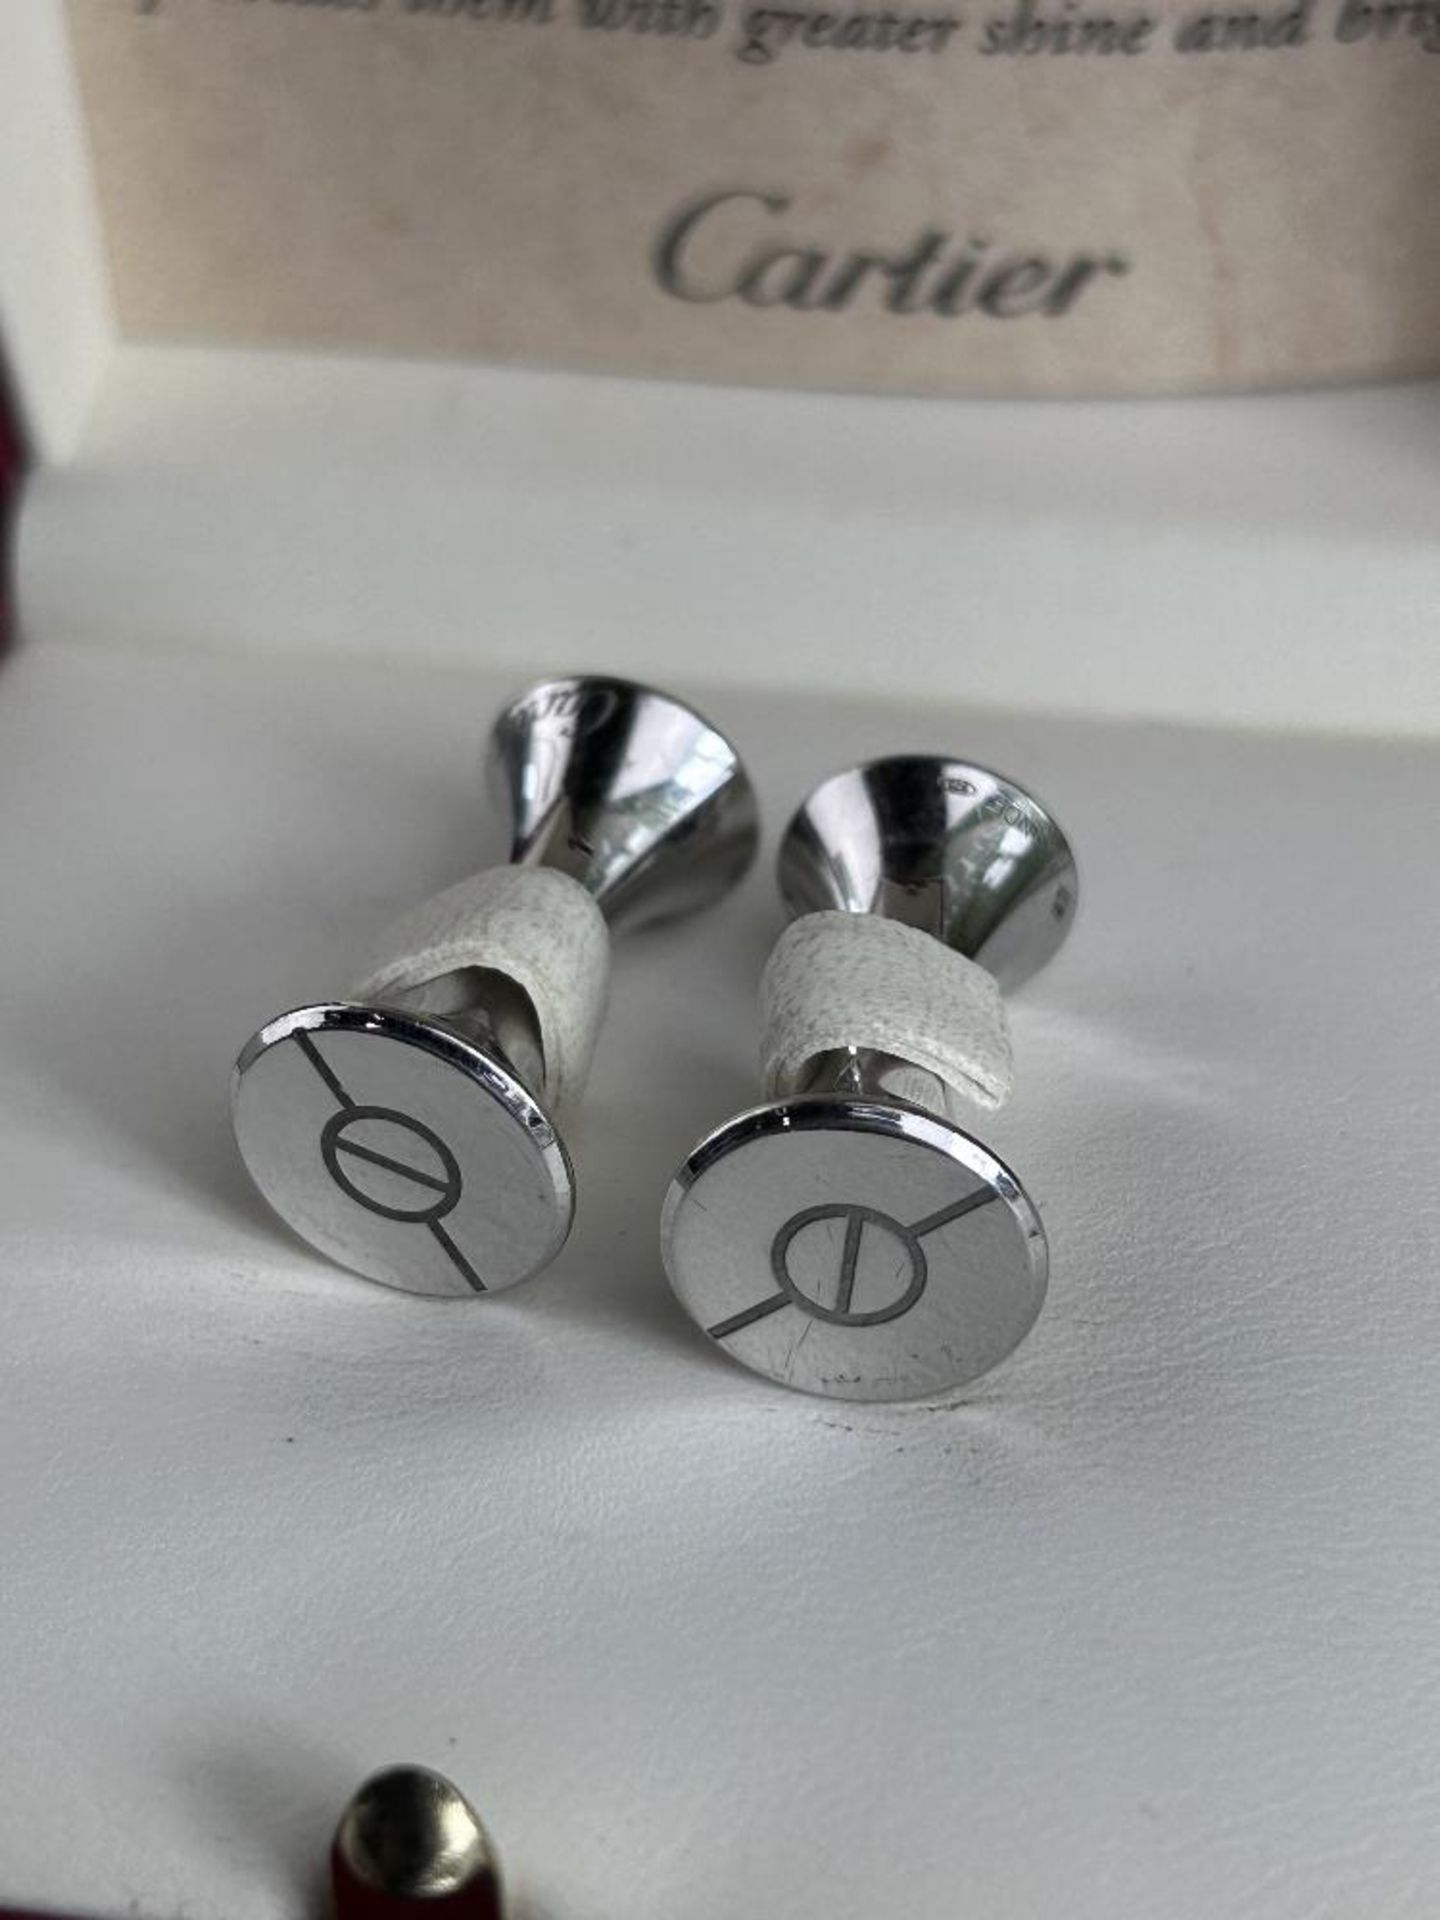 Cartier Sterling Silver Signature Screw Design Love Collection Cufflinks - Image 3 of 5